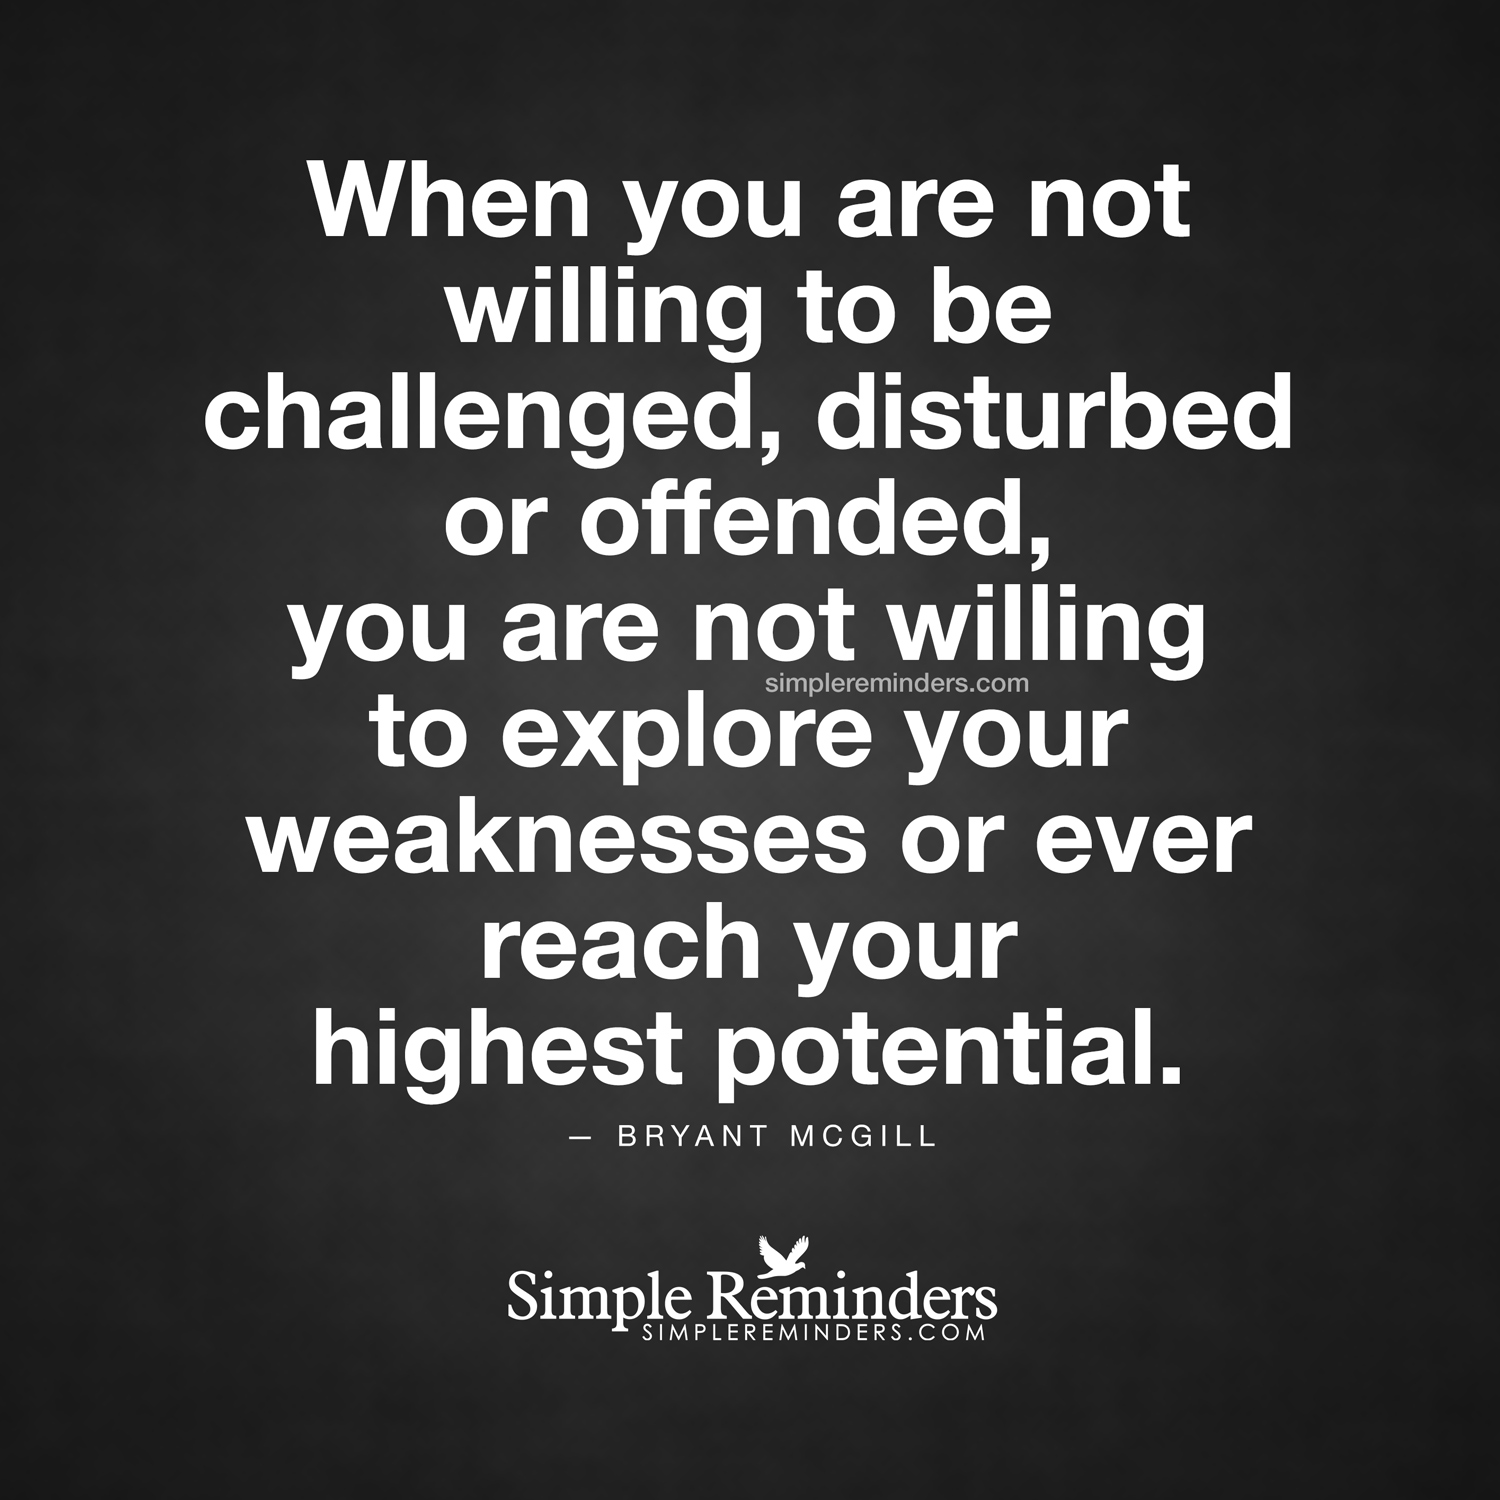 When you are not willing to be challenged, disturbed or offended, you are not willing to explore your weaknesses or ever reach your highest potential. Bryant McGill